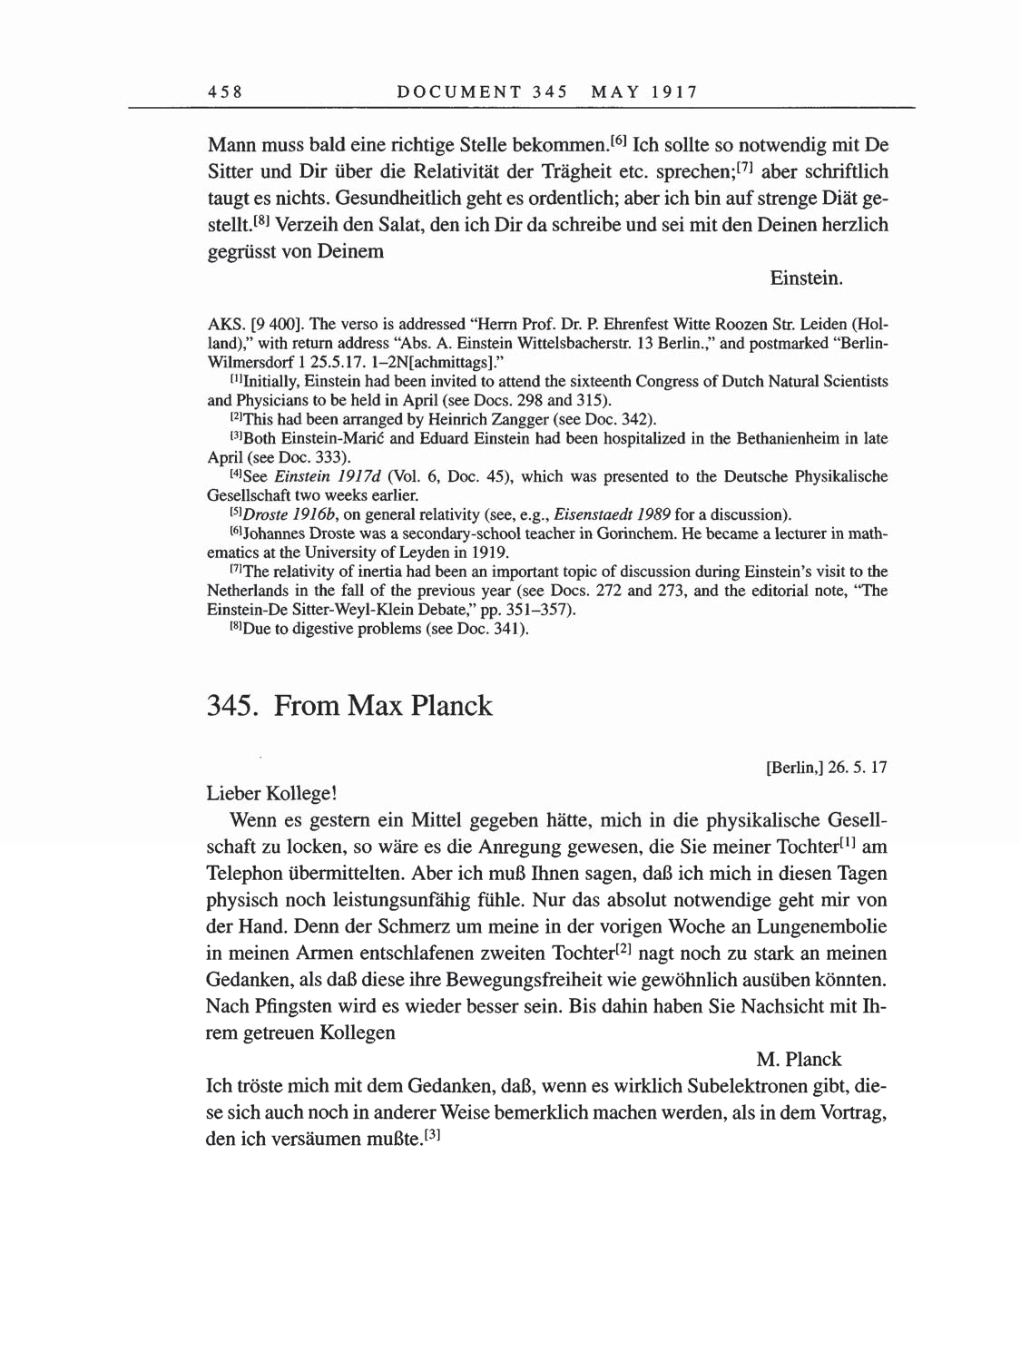 Volume 8, Part A: The Berlin Years: Correspondence 1914-1917 page 458